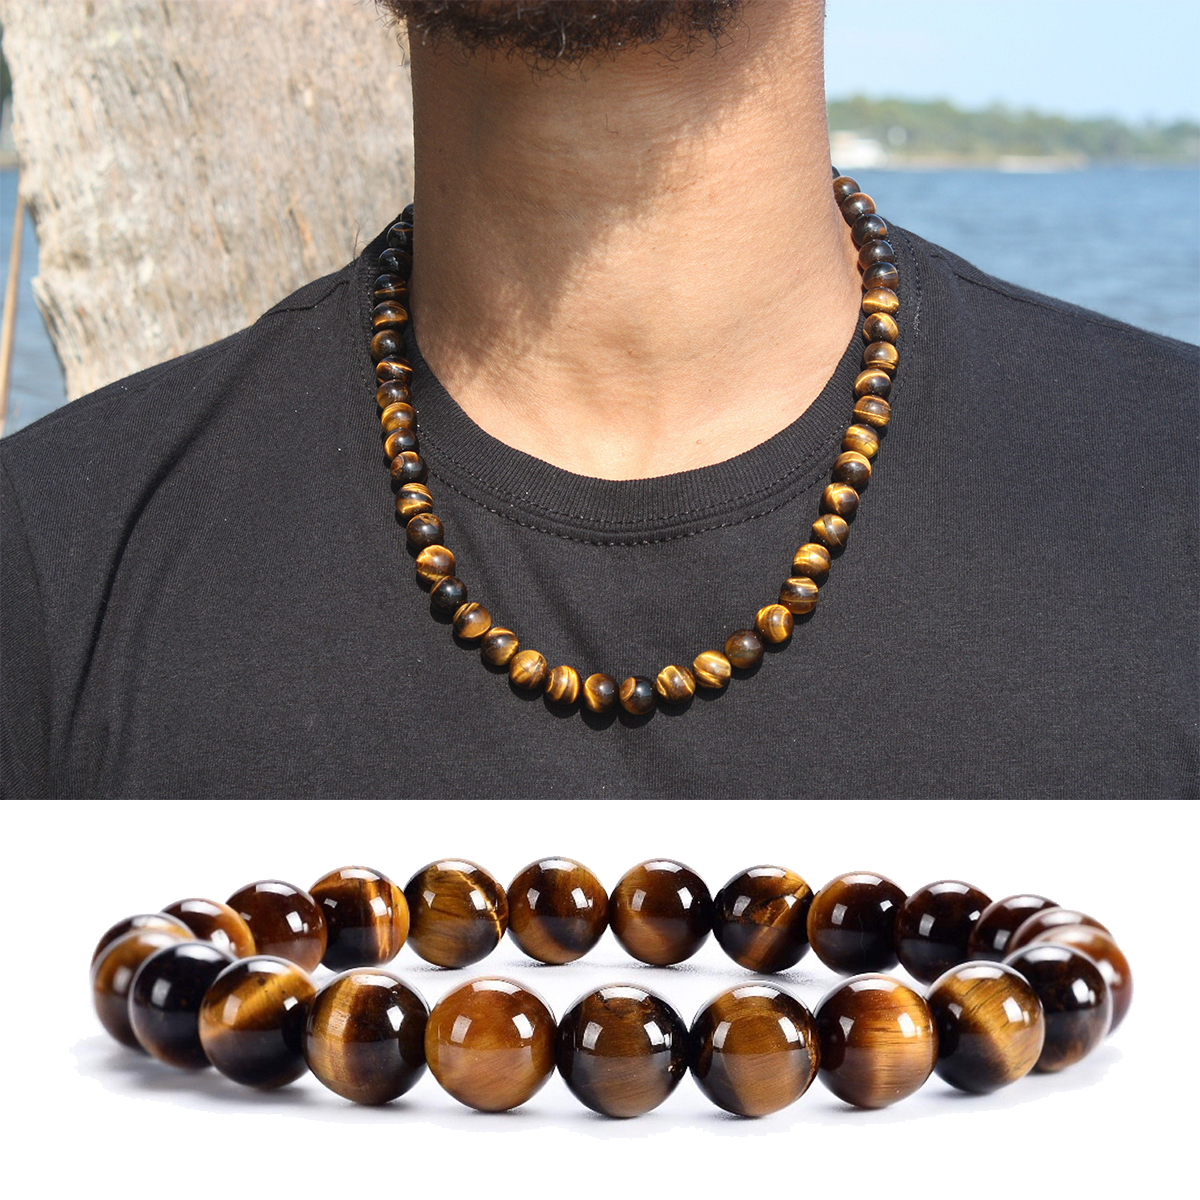 Thebeadchest Matte Tiger Eye Beads (8mm): Organic Gemstone Round Spherical Energy Stone Healing Power Crystal for Jewelry Bracelet Mala Necklace